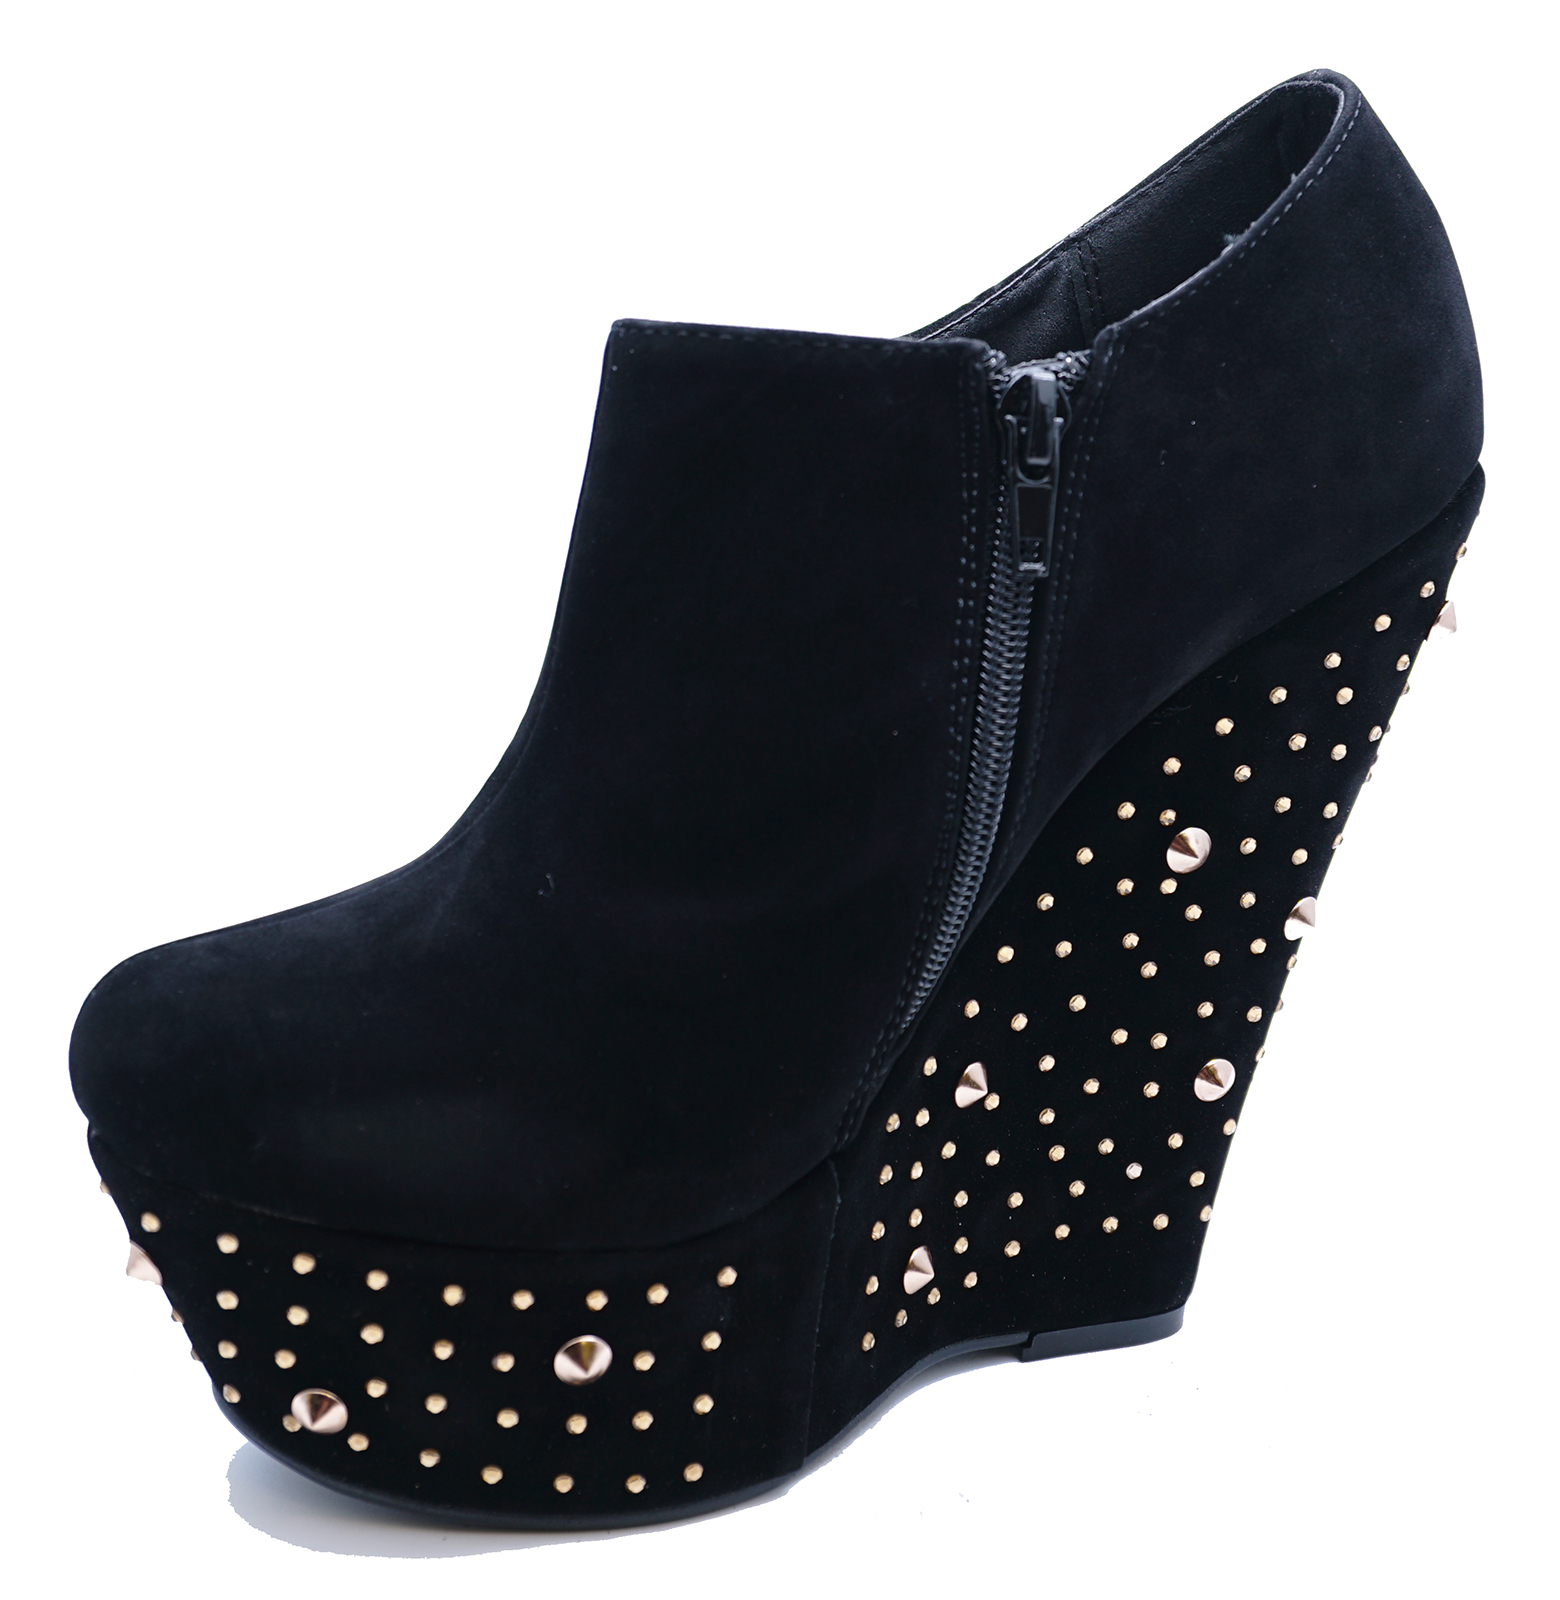 black wedge ankle boots uk